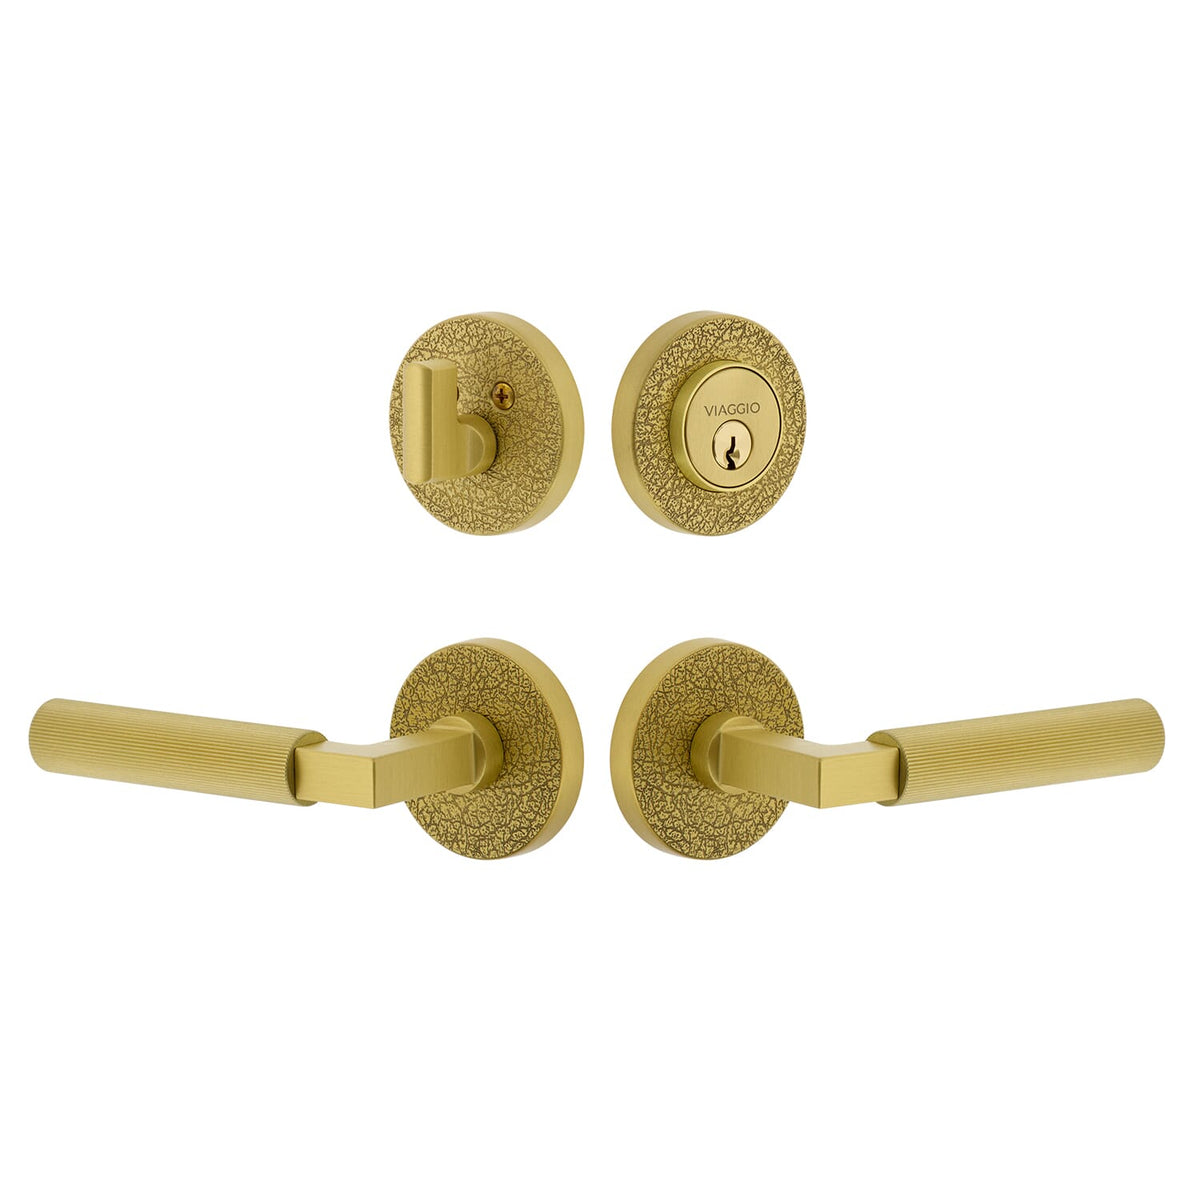 Circolo Leather Rosette Entry Set with Contempo Fluted Lever  in Satin Brass